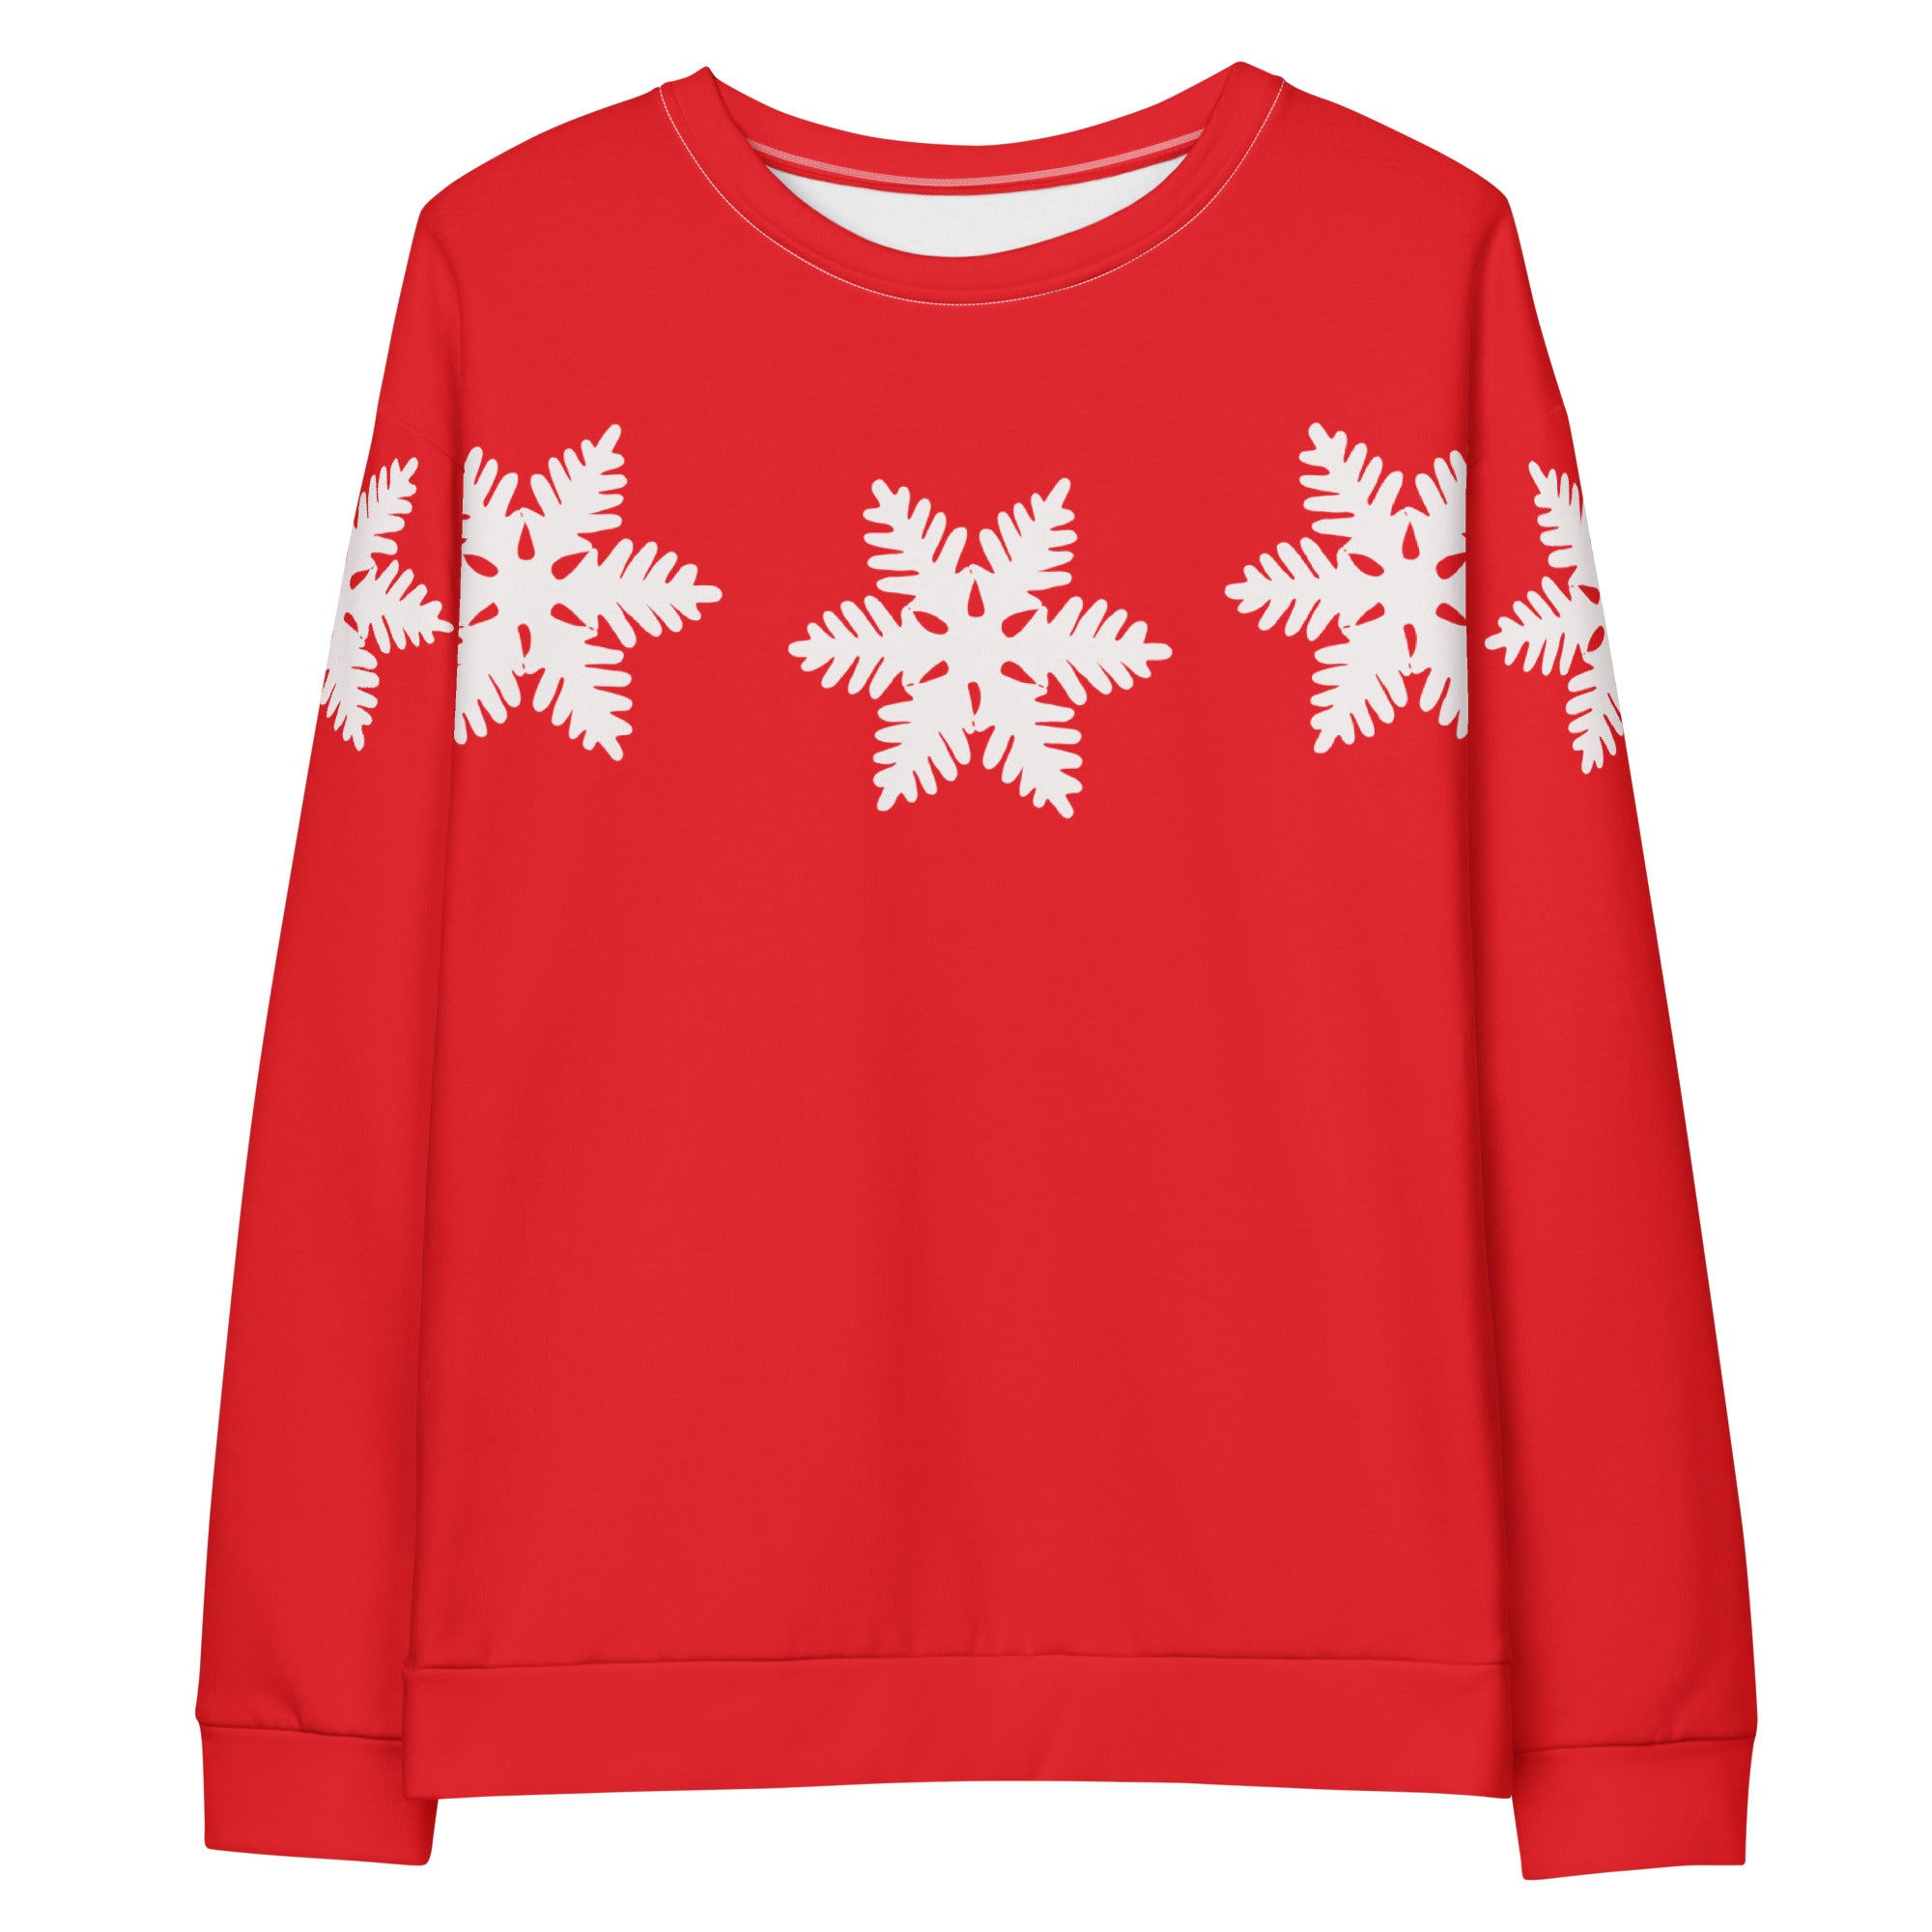 Mickey and Minnie Christmas Sweater All Over Print Shirt Disney Christmas Outfit Snowflake Red Sweatshirt